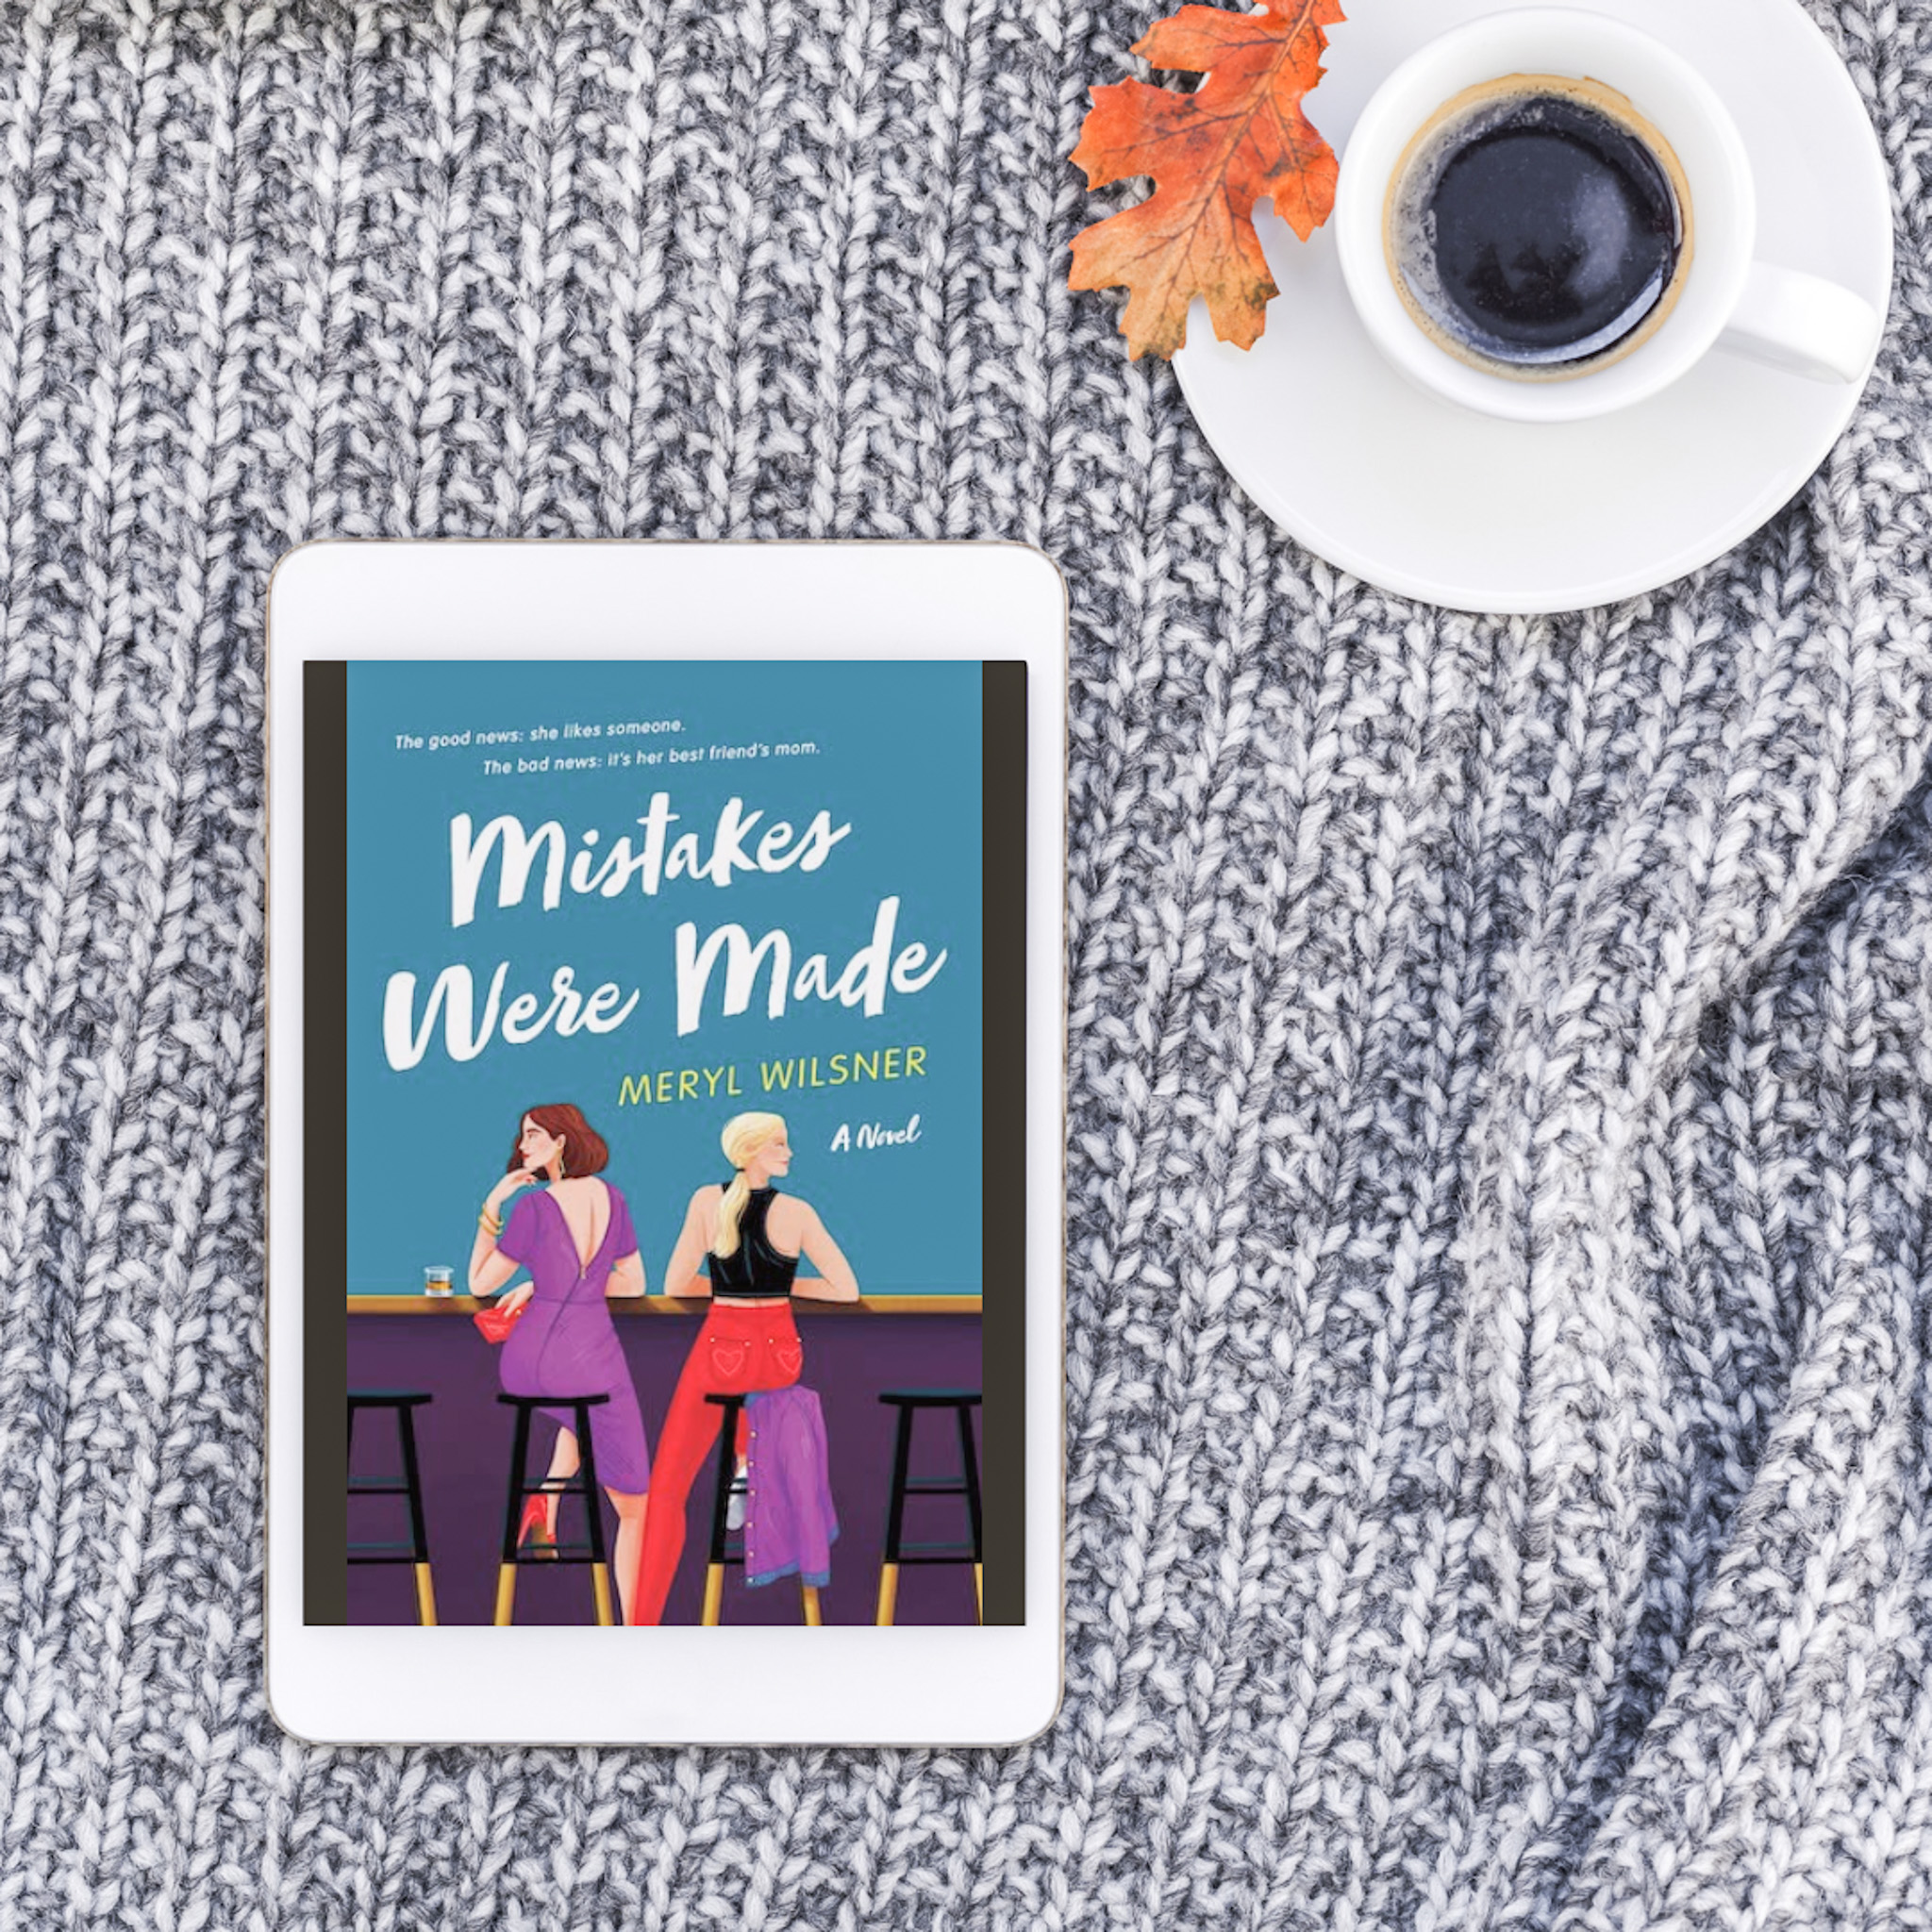 ARC Review: Mistakes Were Made by Meryl Wilsner